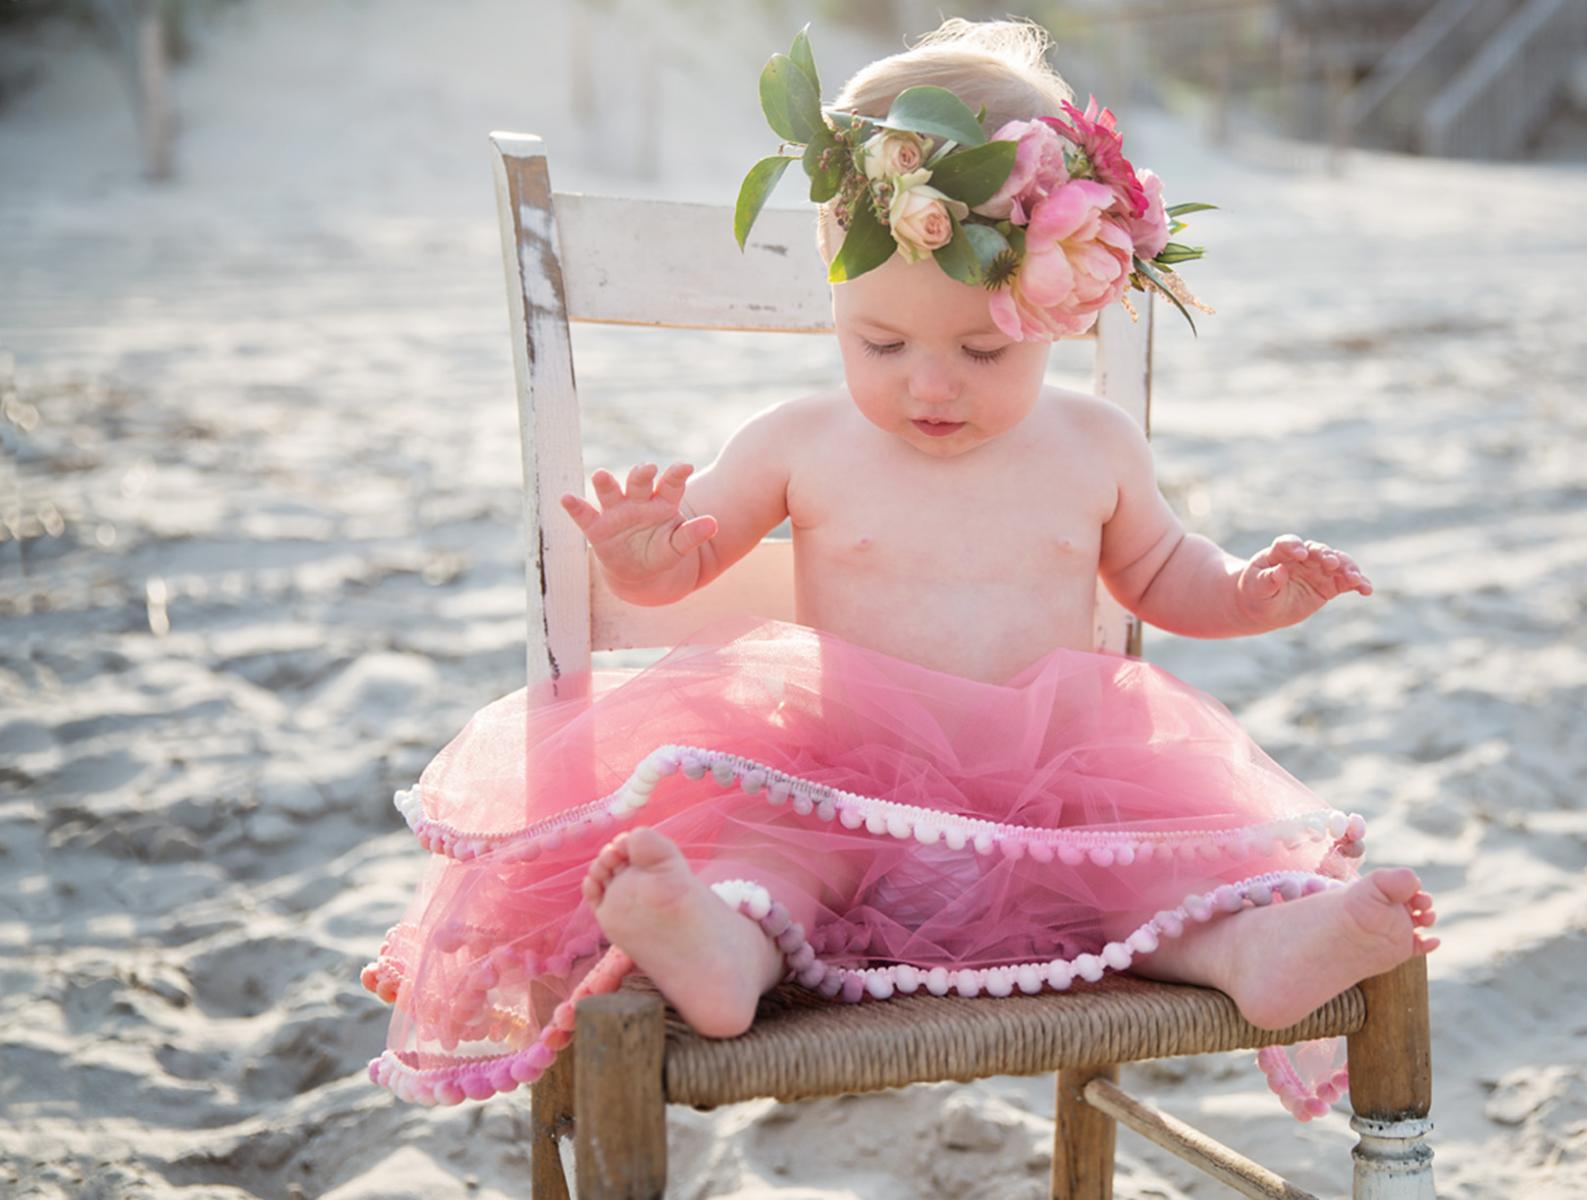 One year old birthday photos of girl in tutu and flower crown